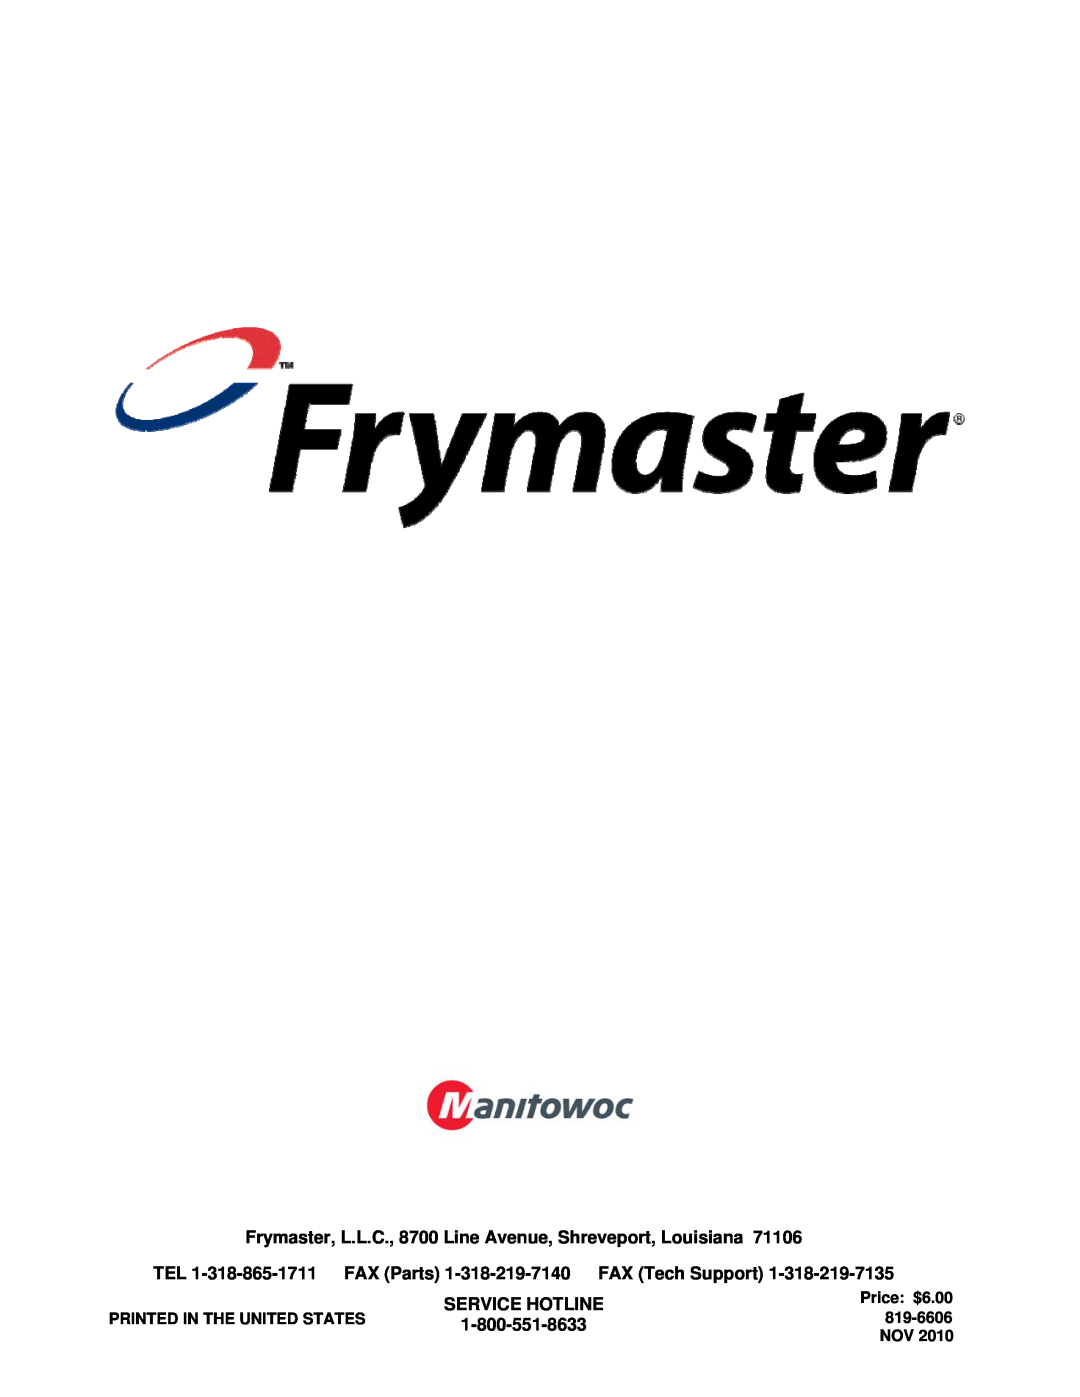 Frymaster 8196606 manual Service Hotline, 1-800-551-8633, Price: $6.00, Printed In The United States, 819-6606 